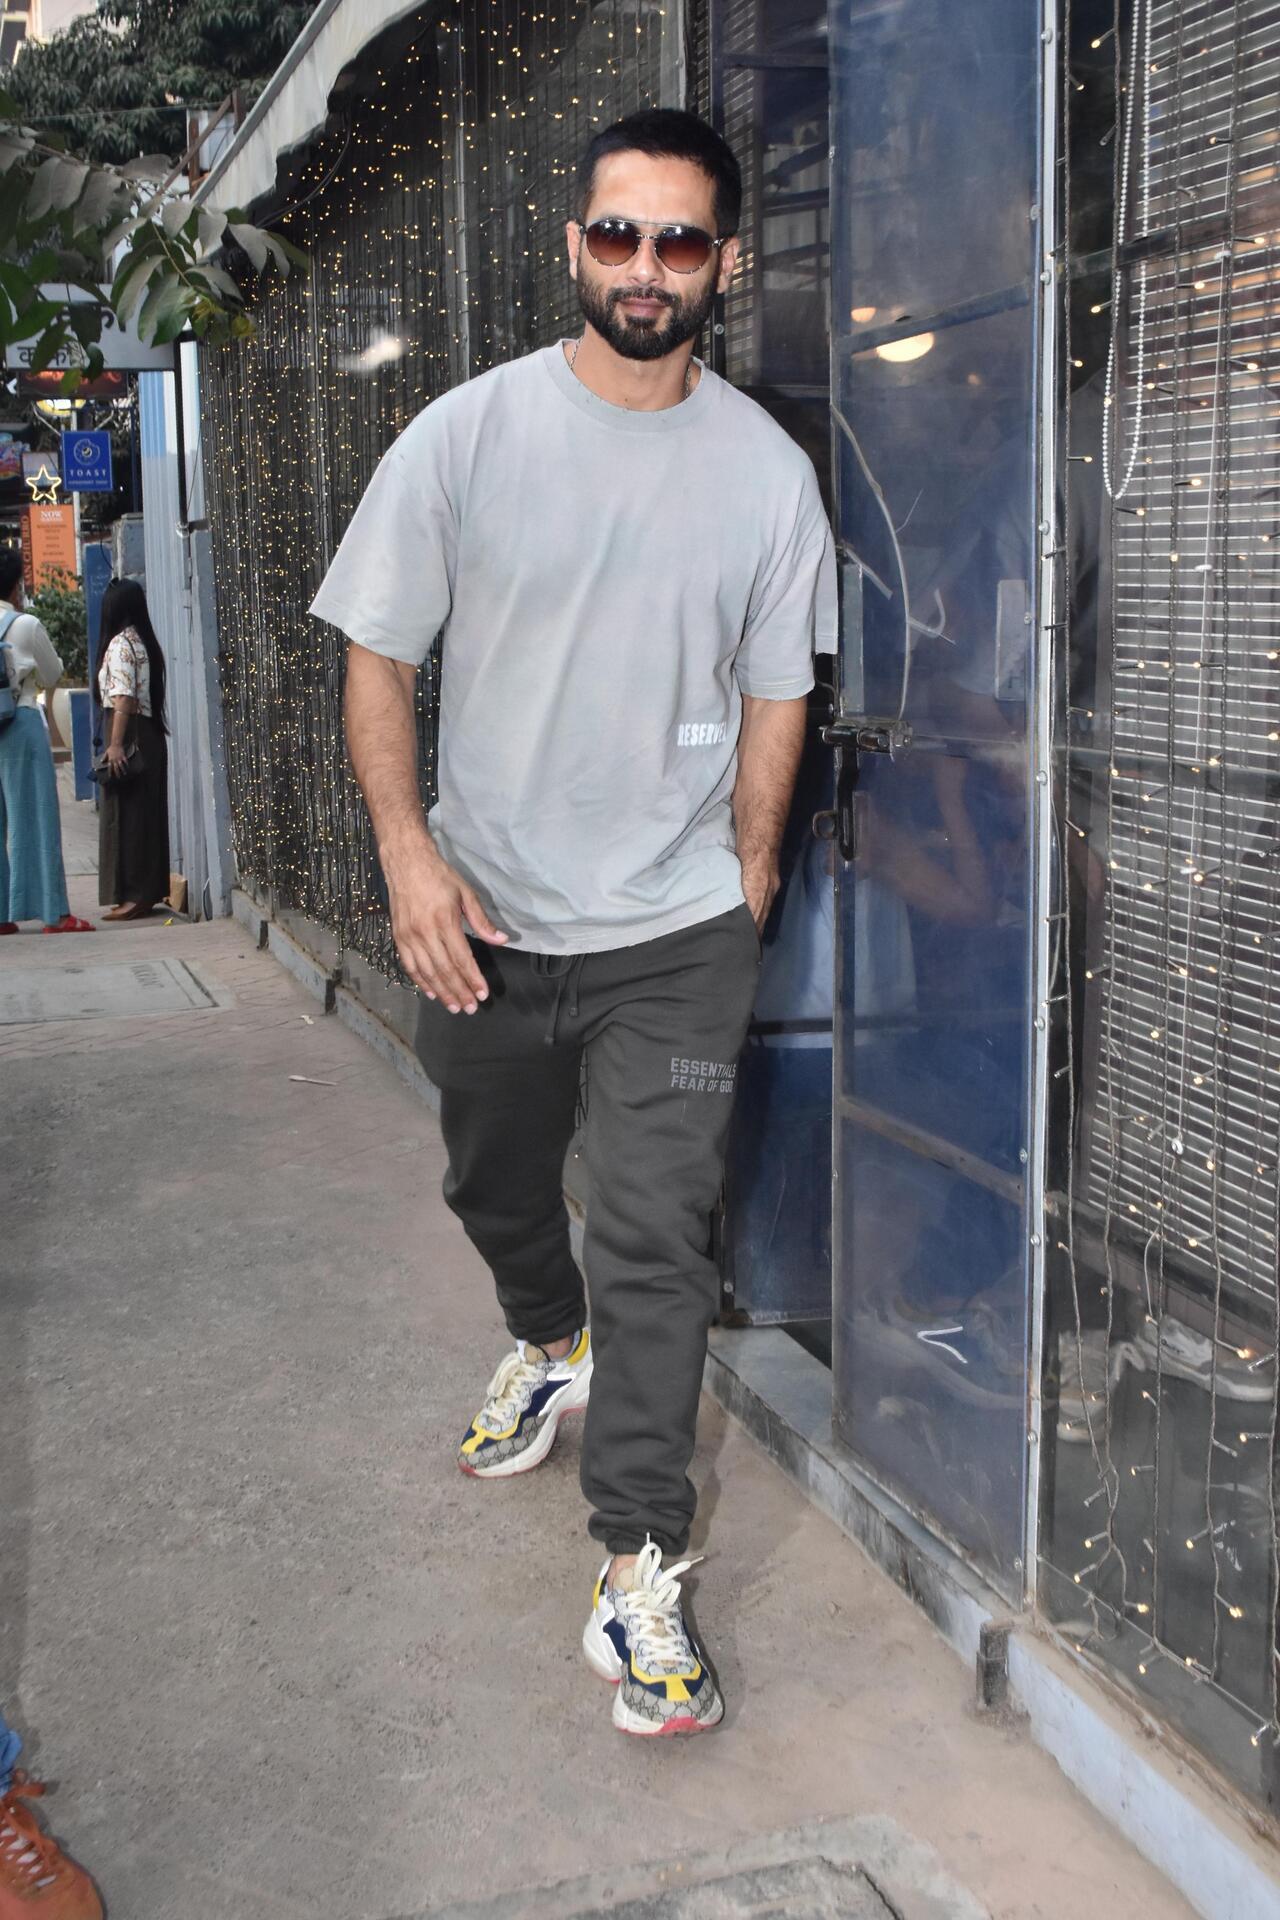 Shahid Kapoor was spotted in the city along with his wife Mira Kapoor